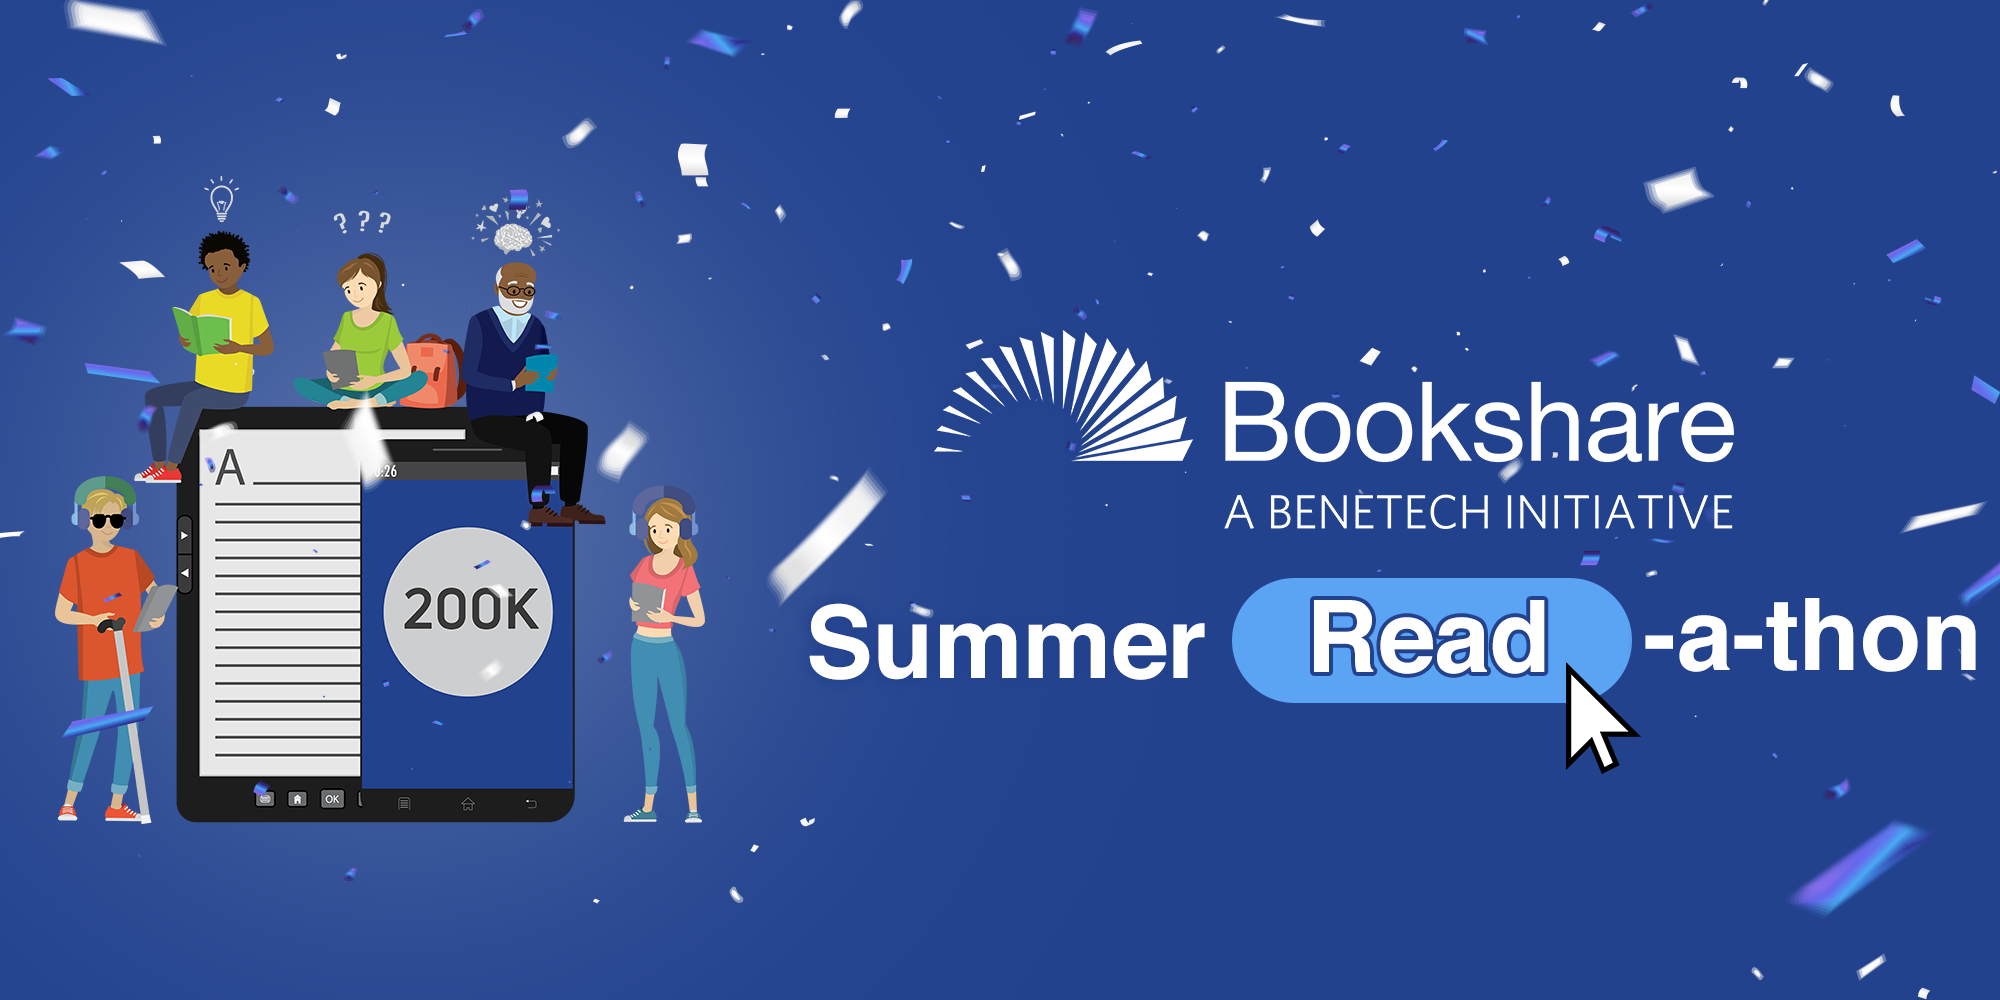 Bookshare #AllInTogether Summer Read-a-thon tips for parents with 4 graphic figures reading books and 200K on a device with confetti.